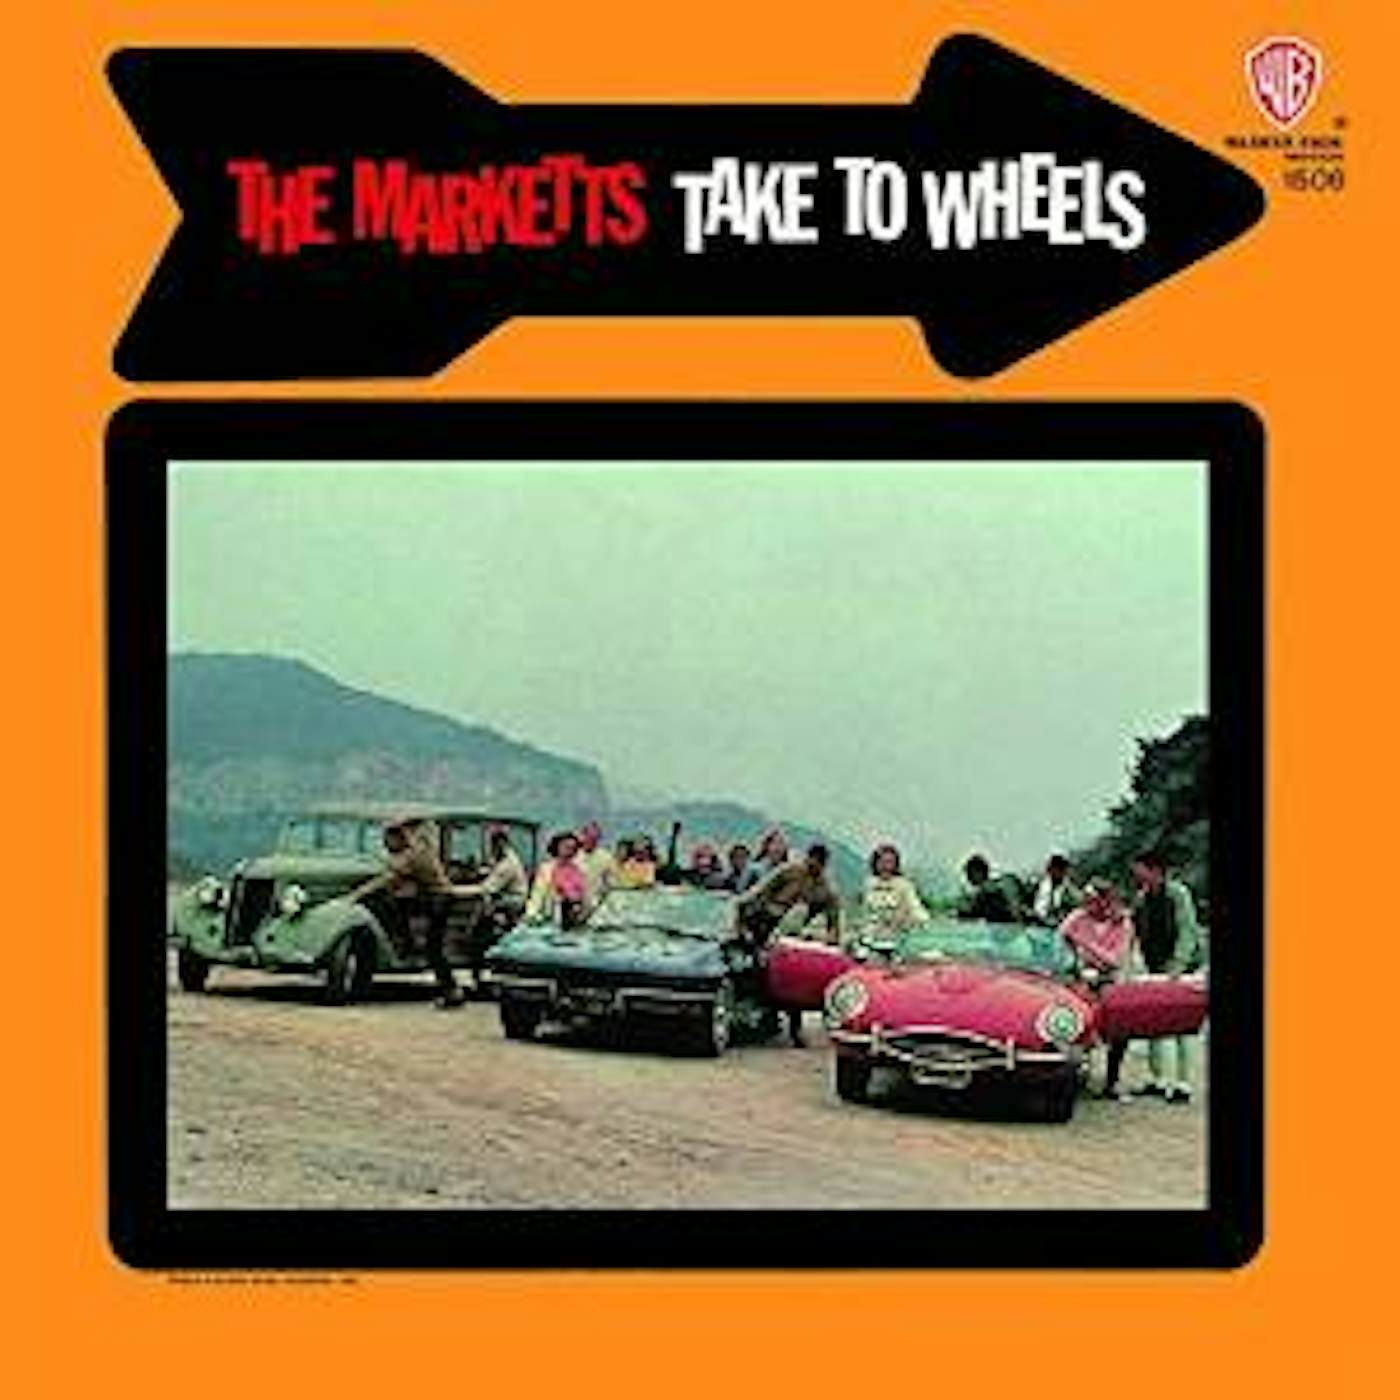 The Marketts TAKE TO WHEELS CD